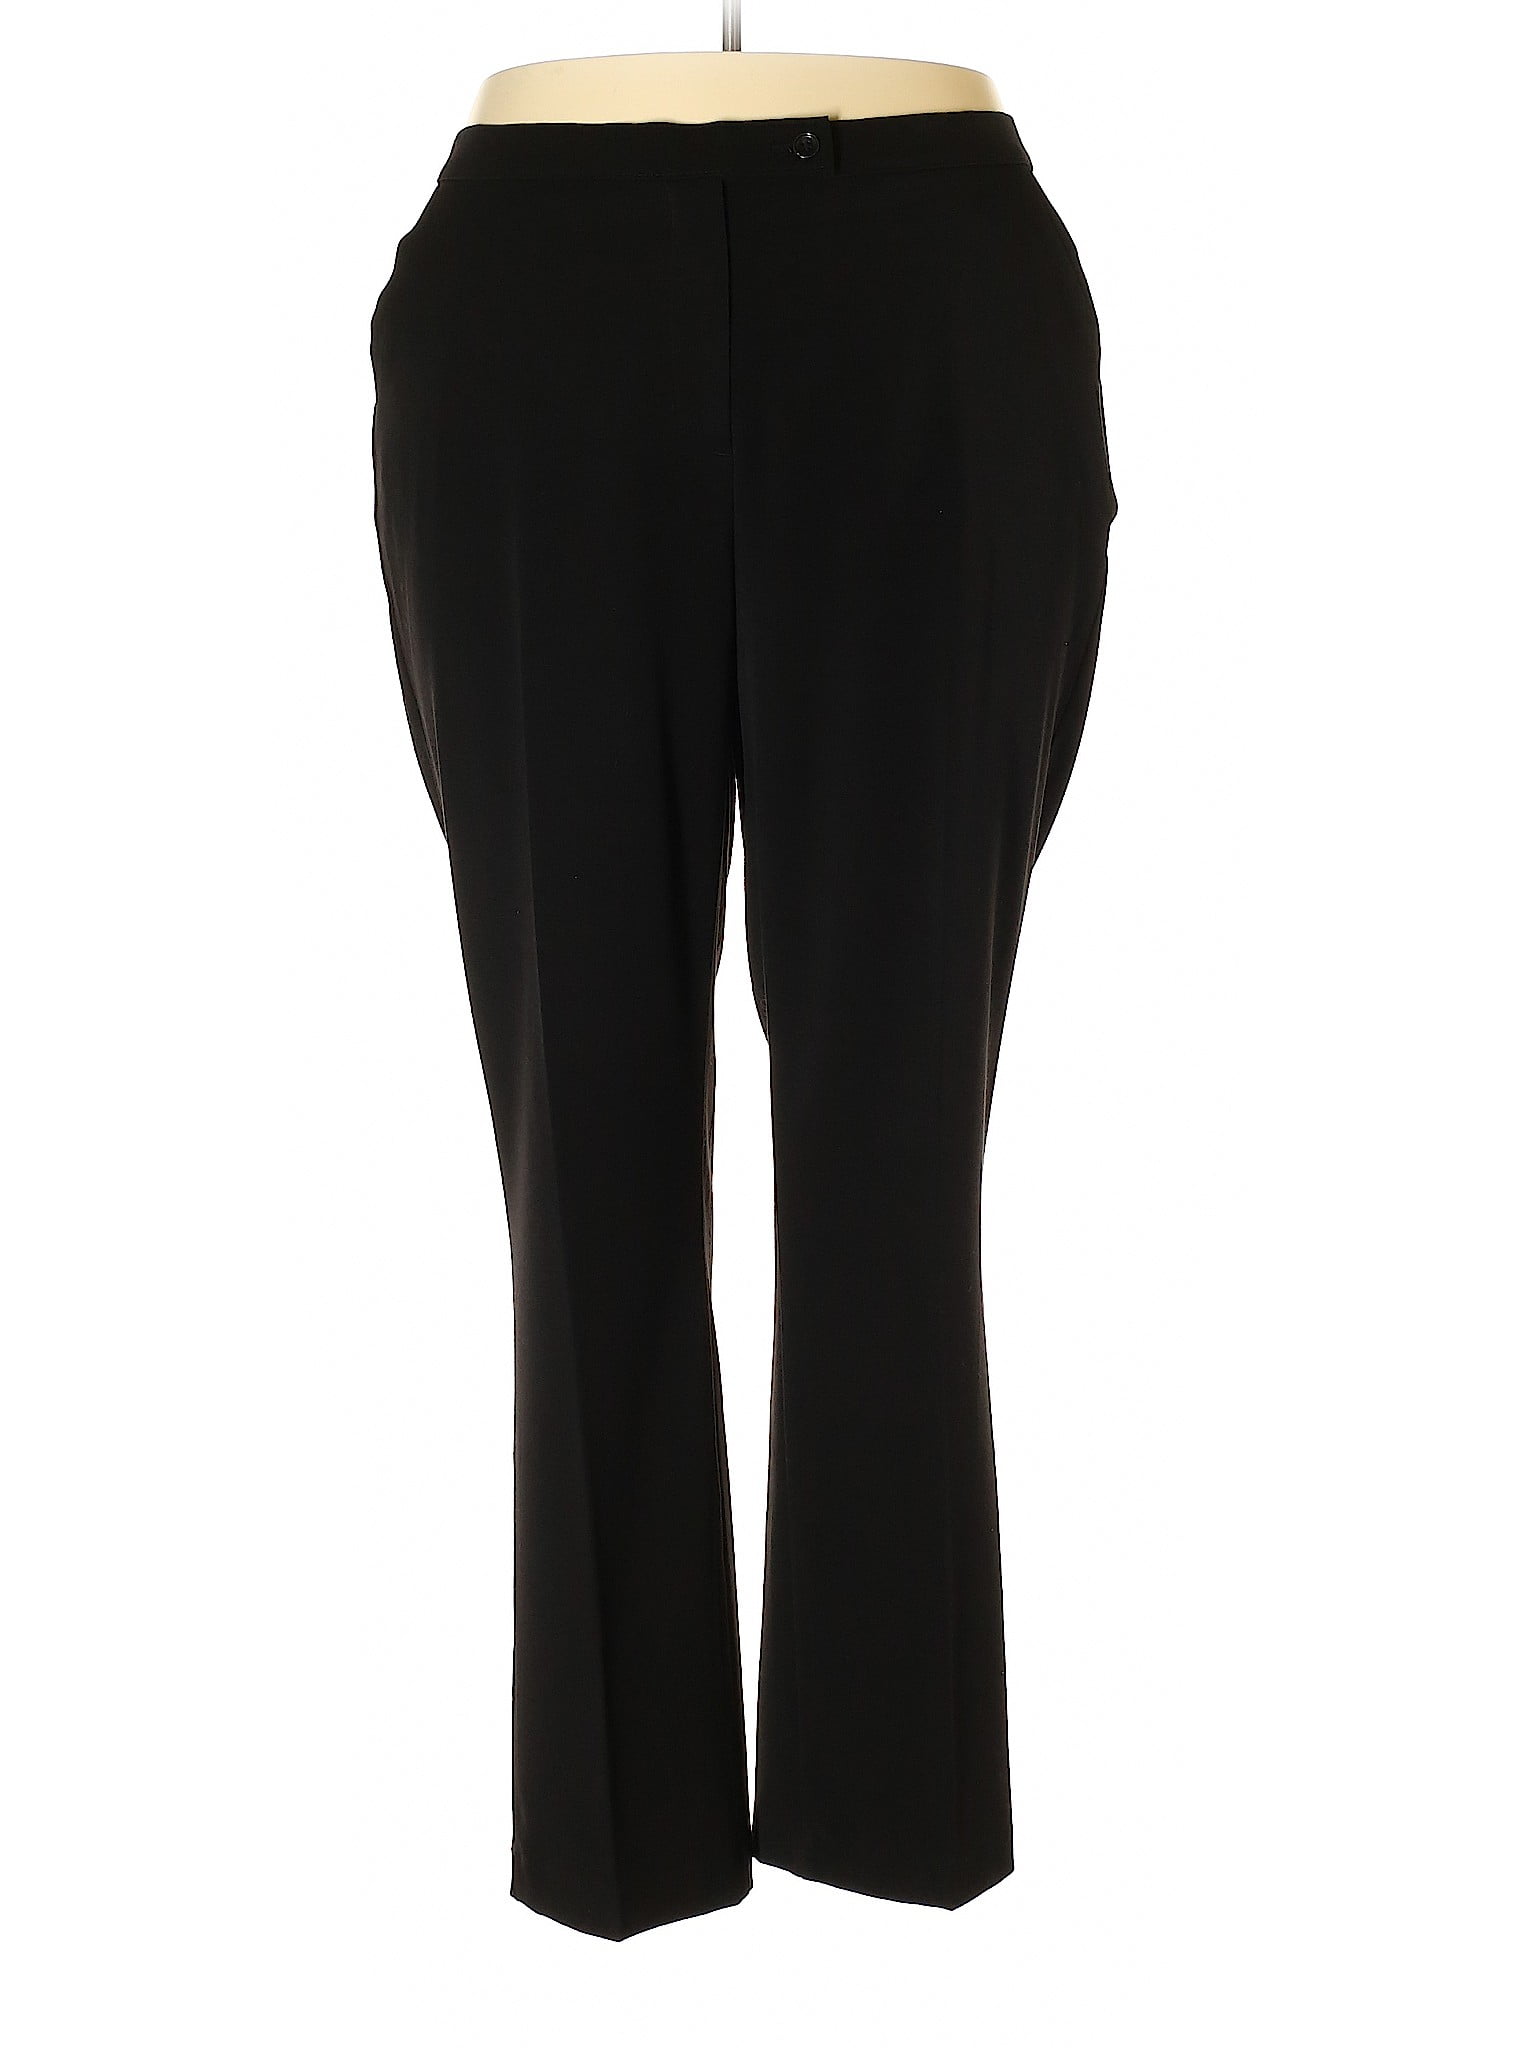 investment ii plus size pants